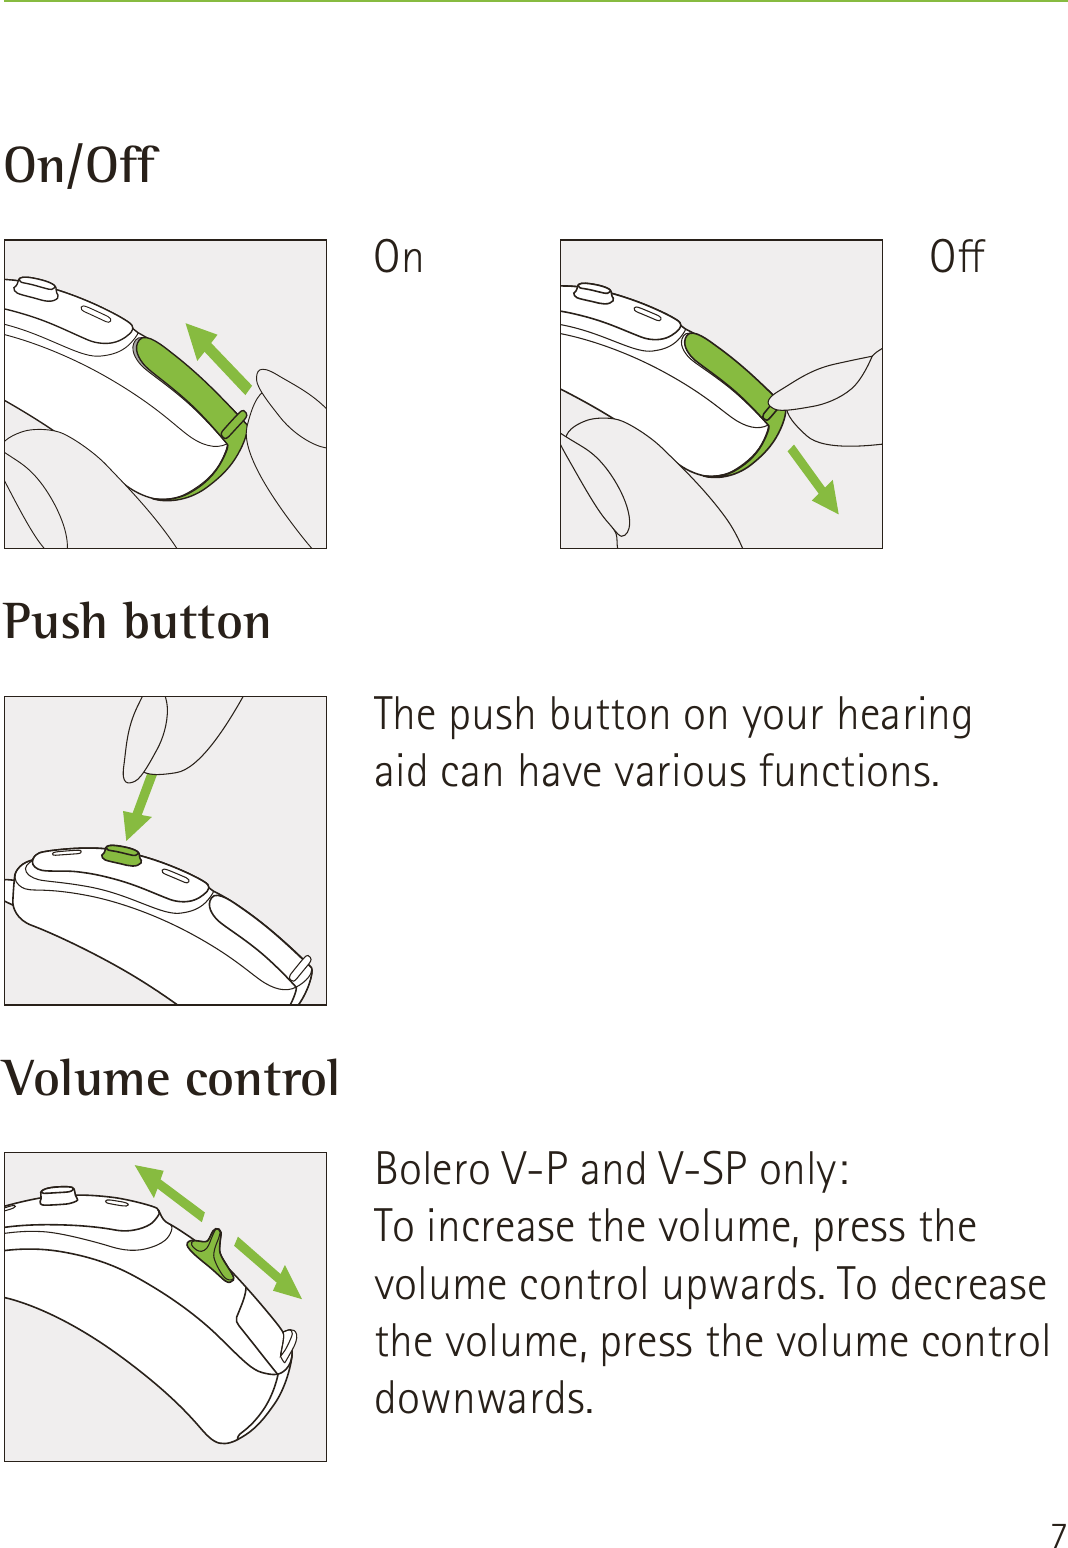 7On/OPush buttonVolume controlThe push button on your hearing  aid can have various functions.  Bolero V-P and V-SP only:To increase the volume, press the volume control upwards. To decrease the volume, press the volume control downwards.OOn